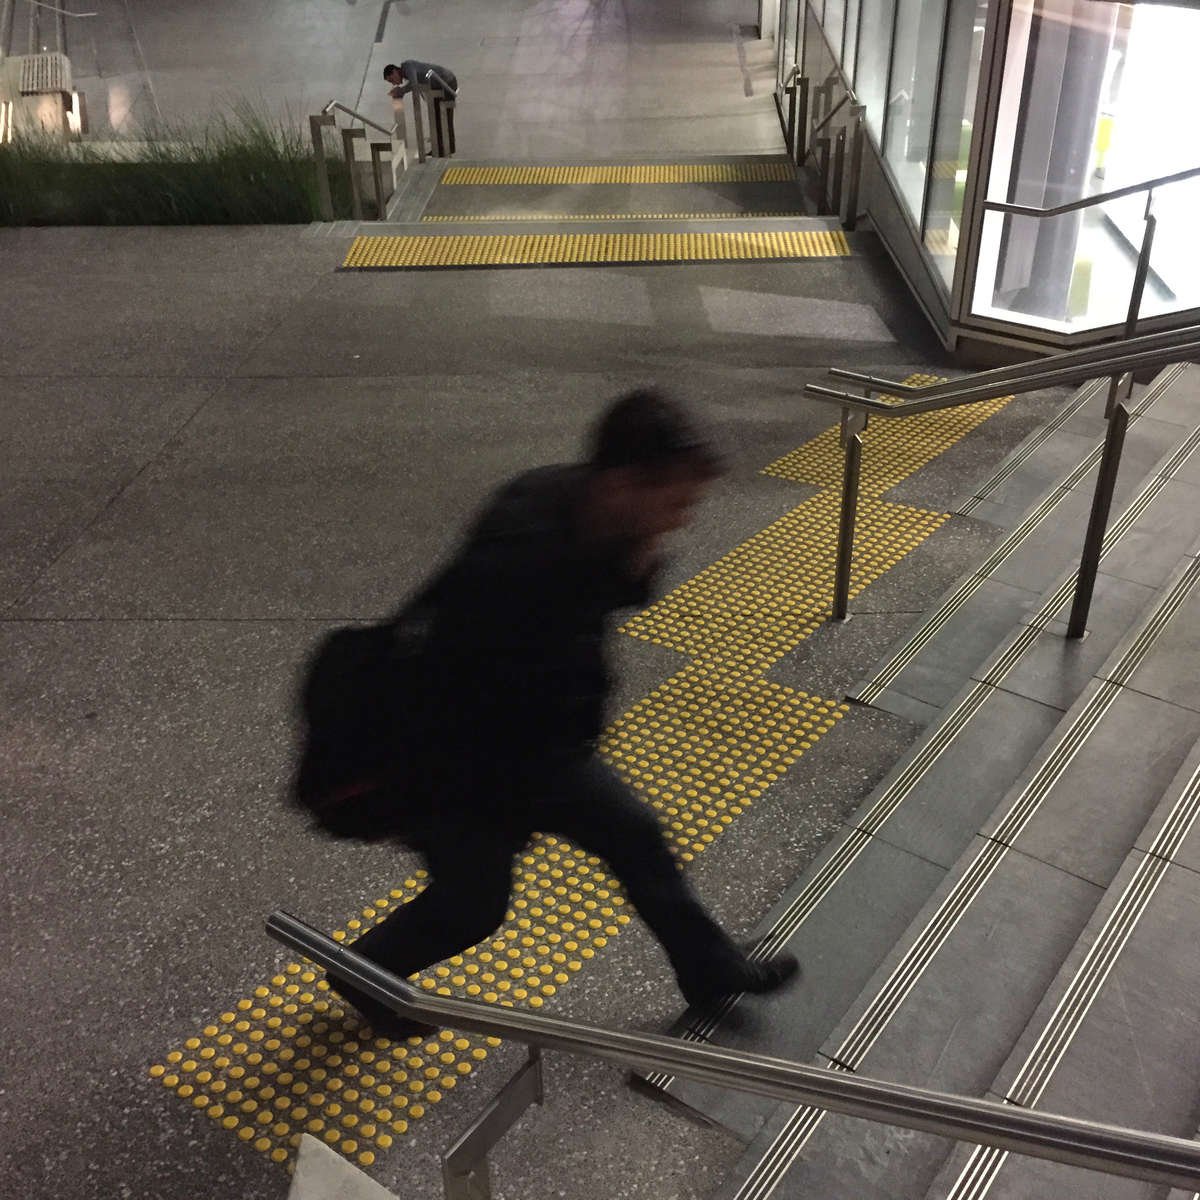 Man walking on TacPro yellow polyurethane tactile indicators at bottom of stair, with other stairs in background